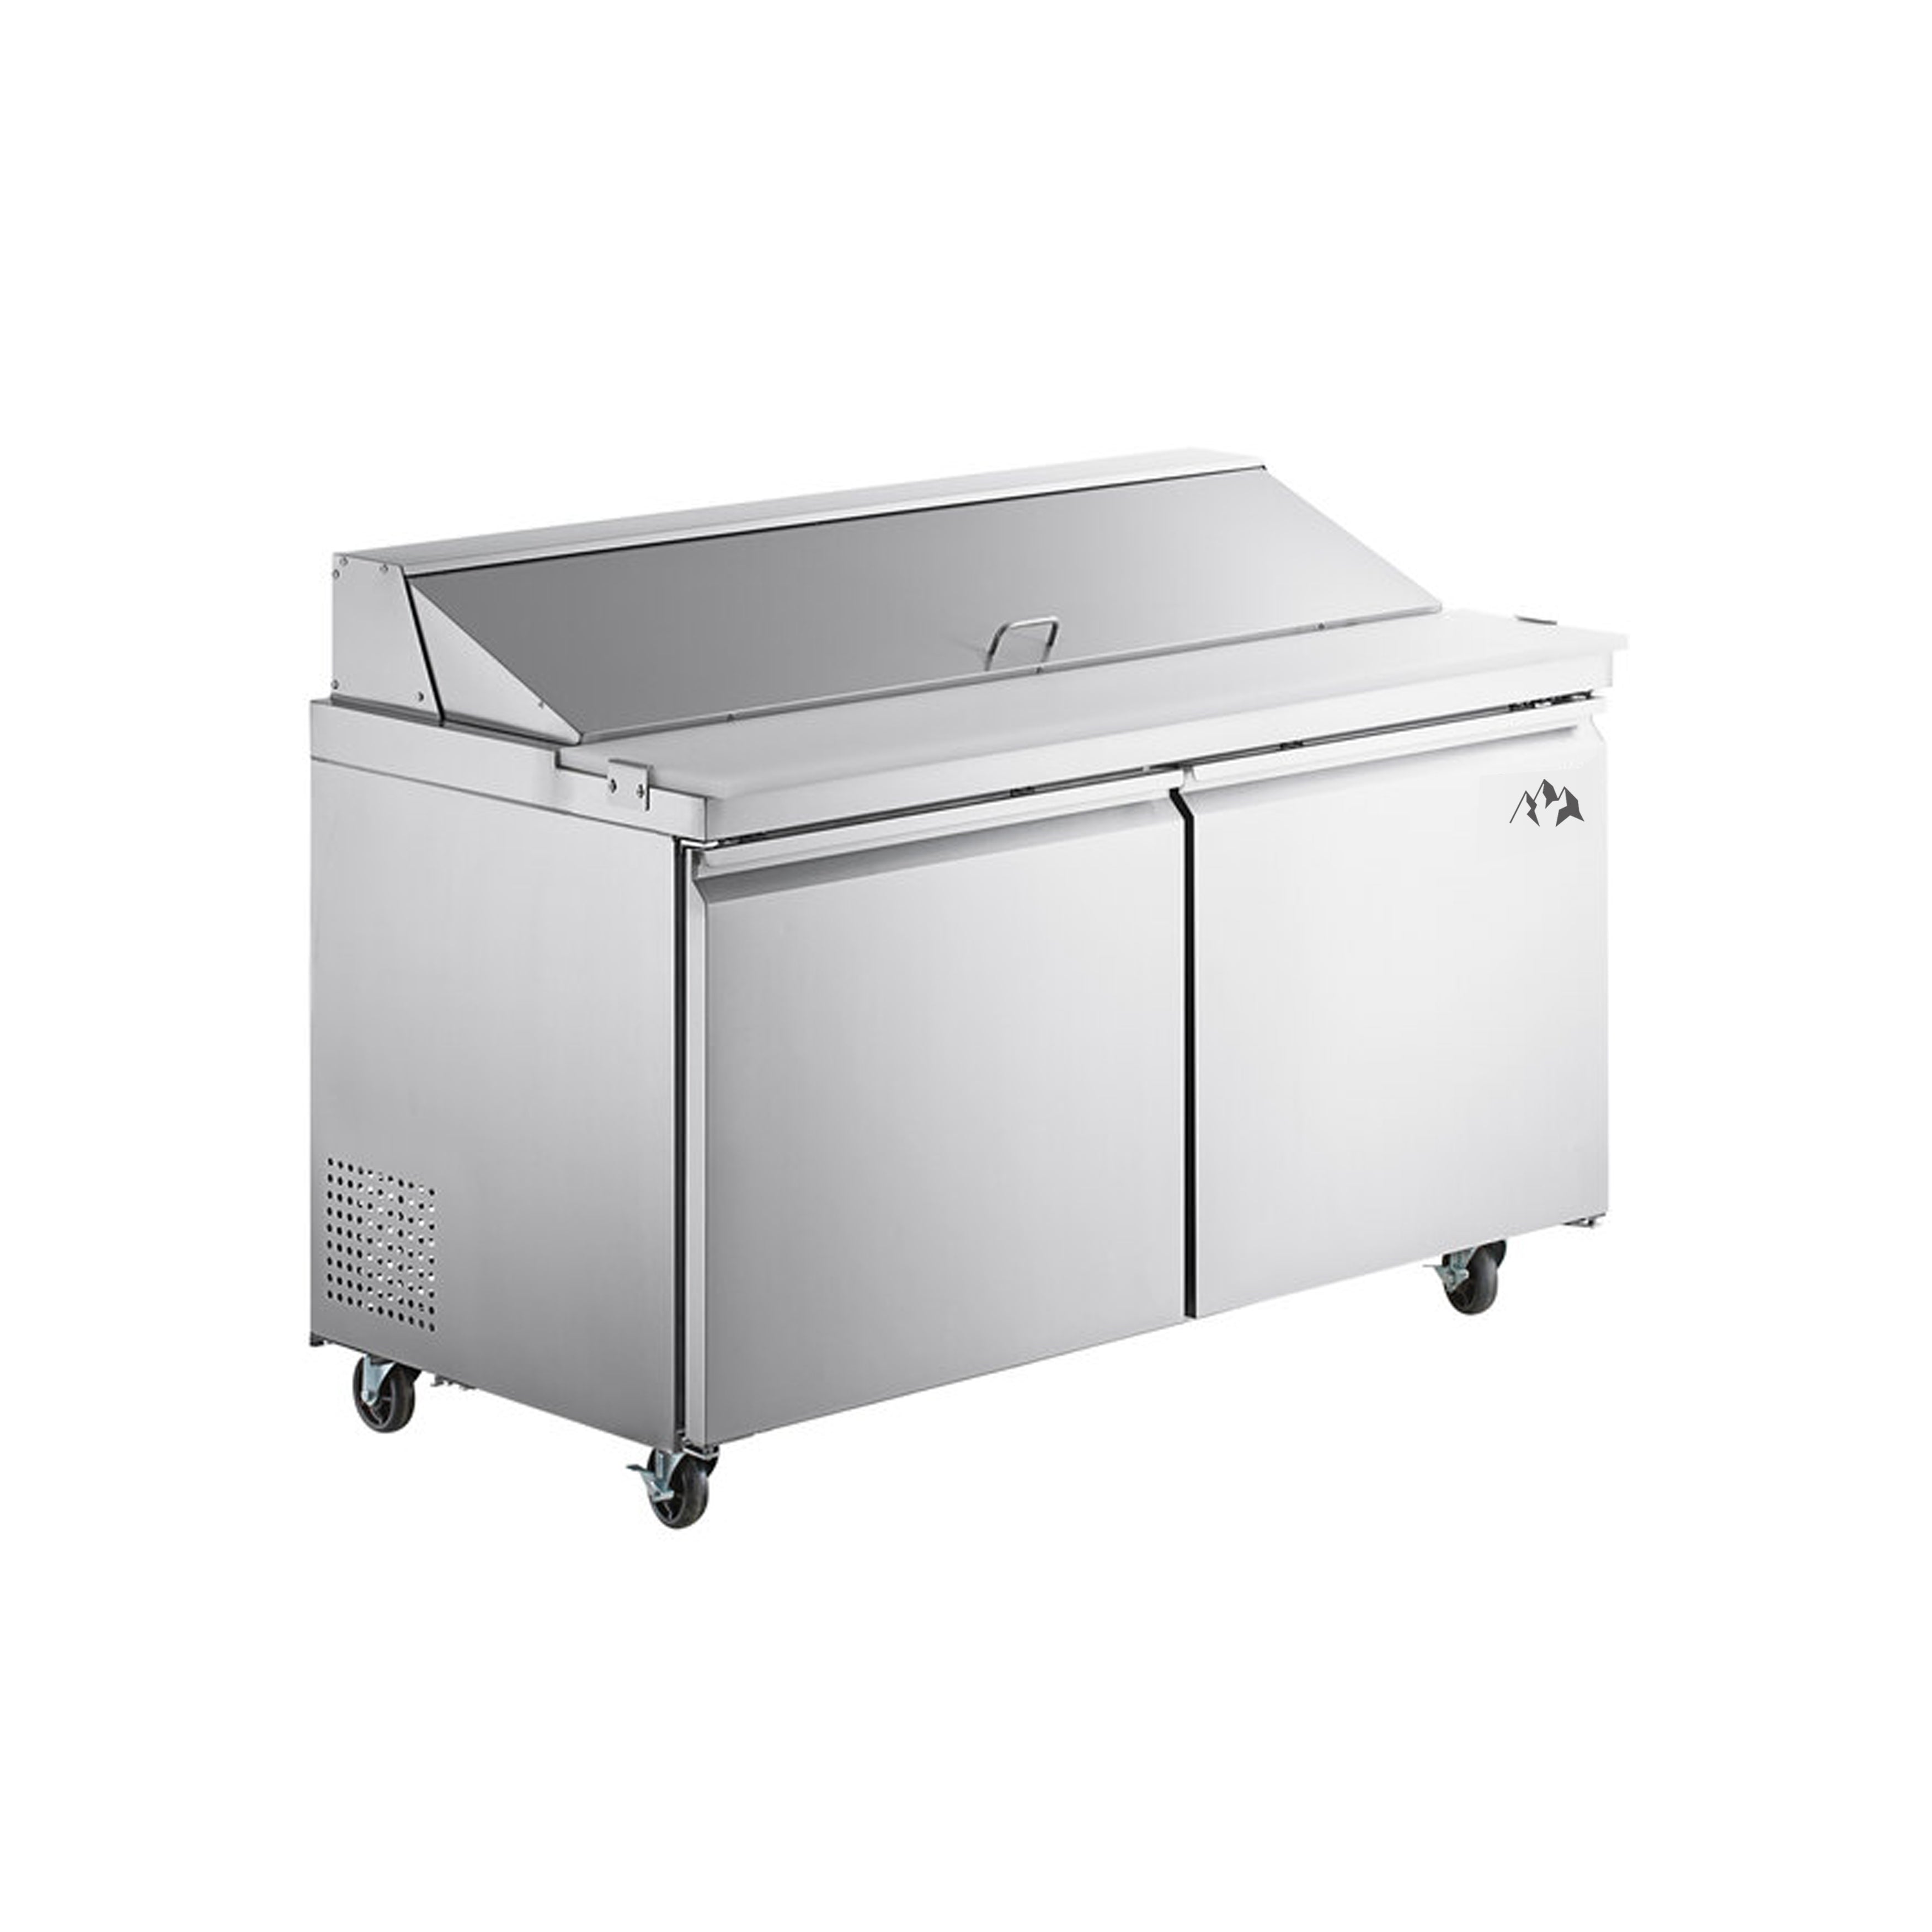 Chef AAA - SS-PT-60M-HC, Commercial 60" Sandwich Prep Table Refrigerator MEGA TOP 24 Pans 2 Door Stainless Steel 15 cu.ft.